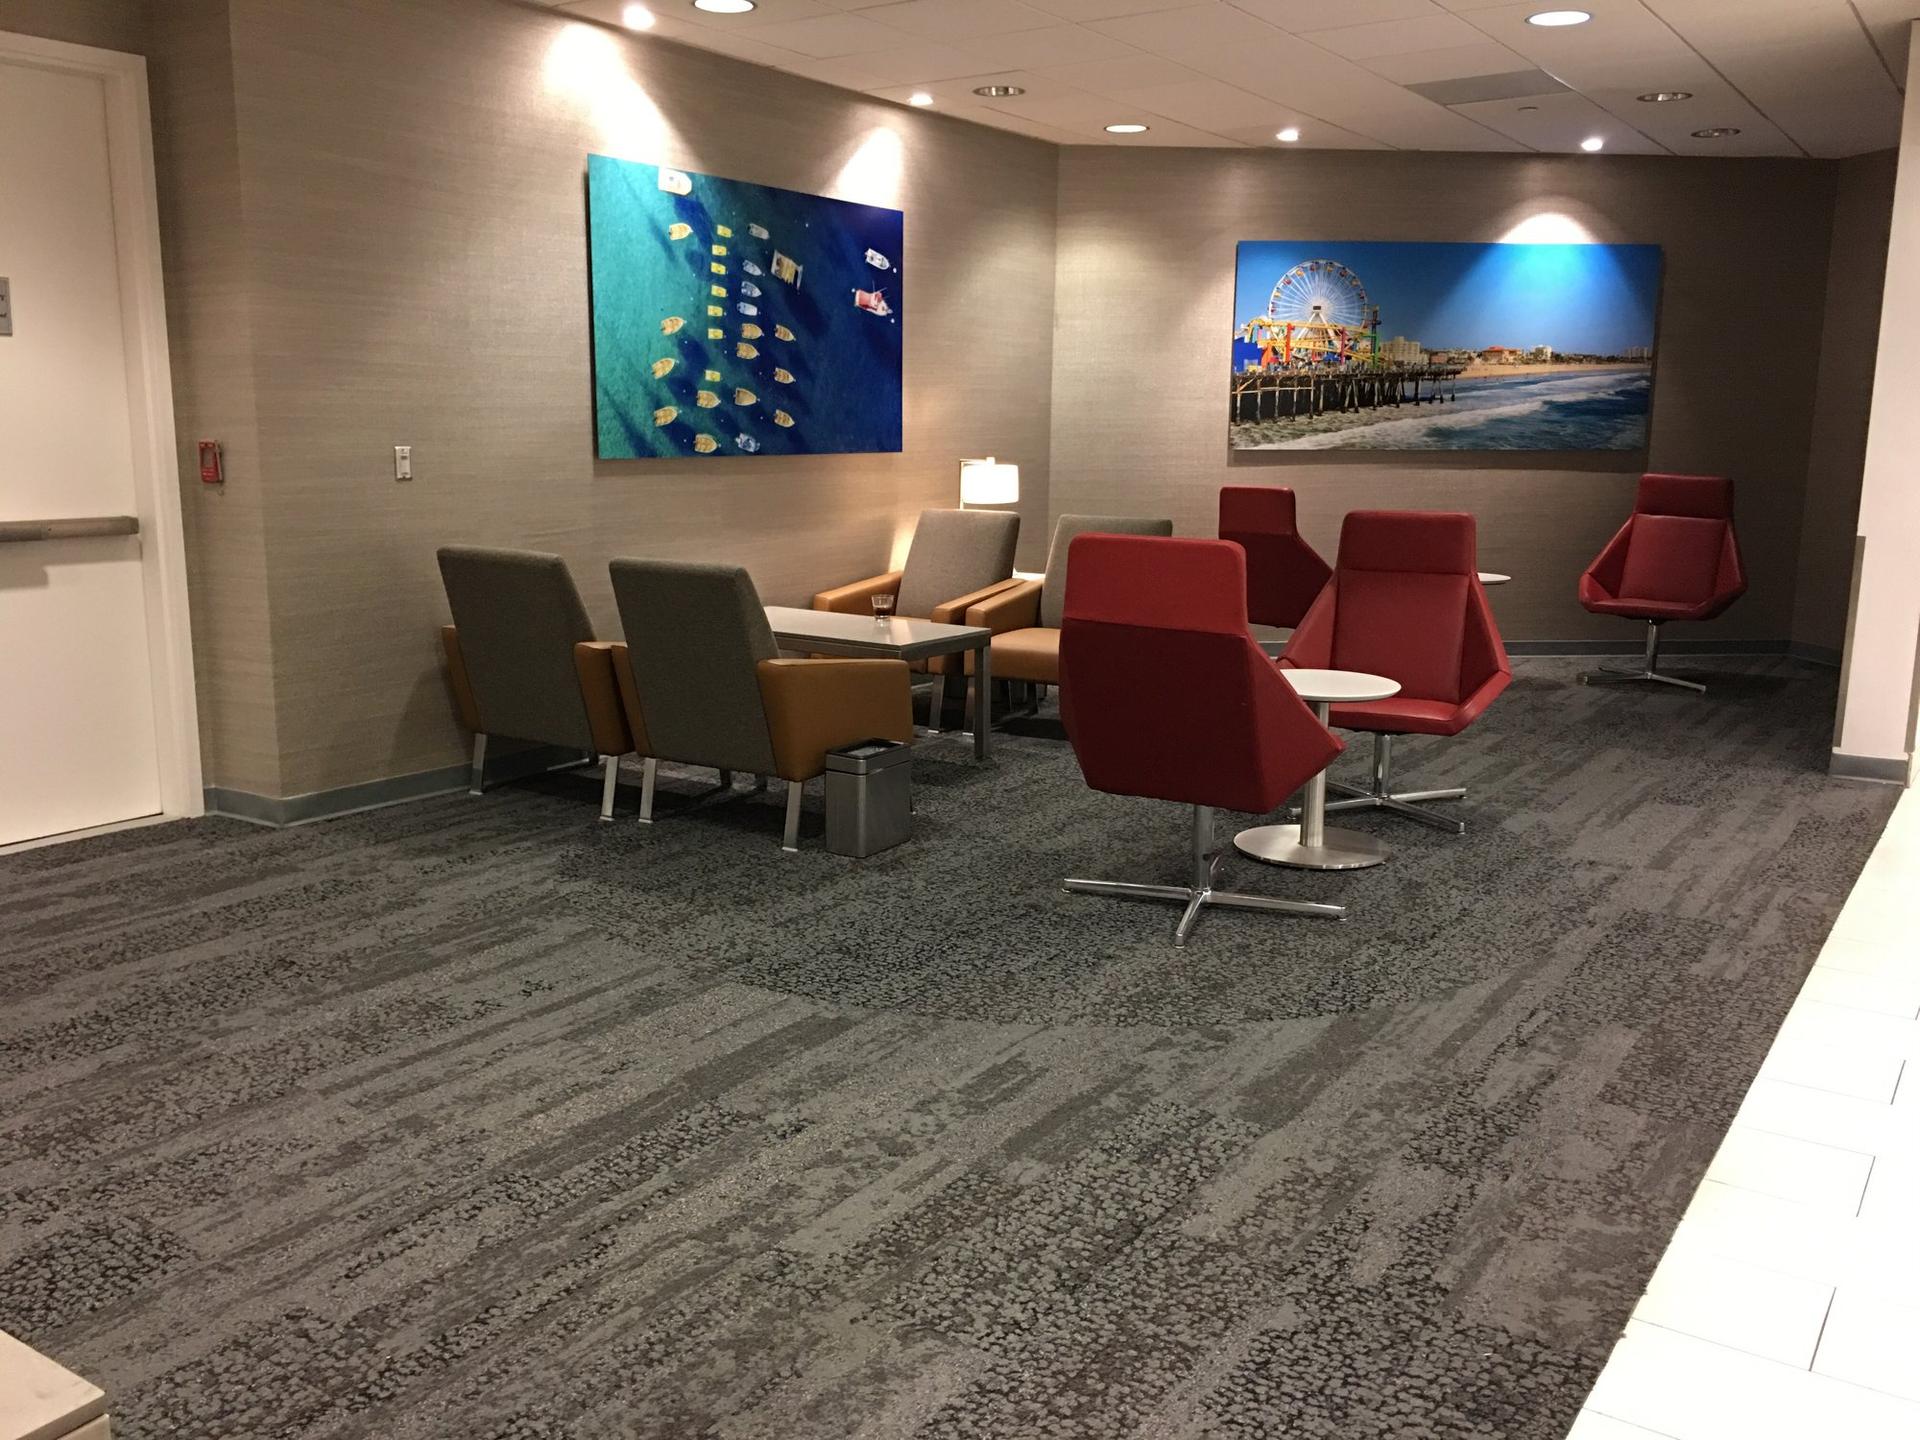 American Airlines Admirals Club image 19 of 38